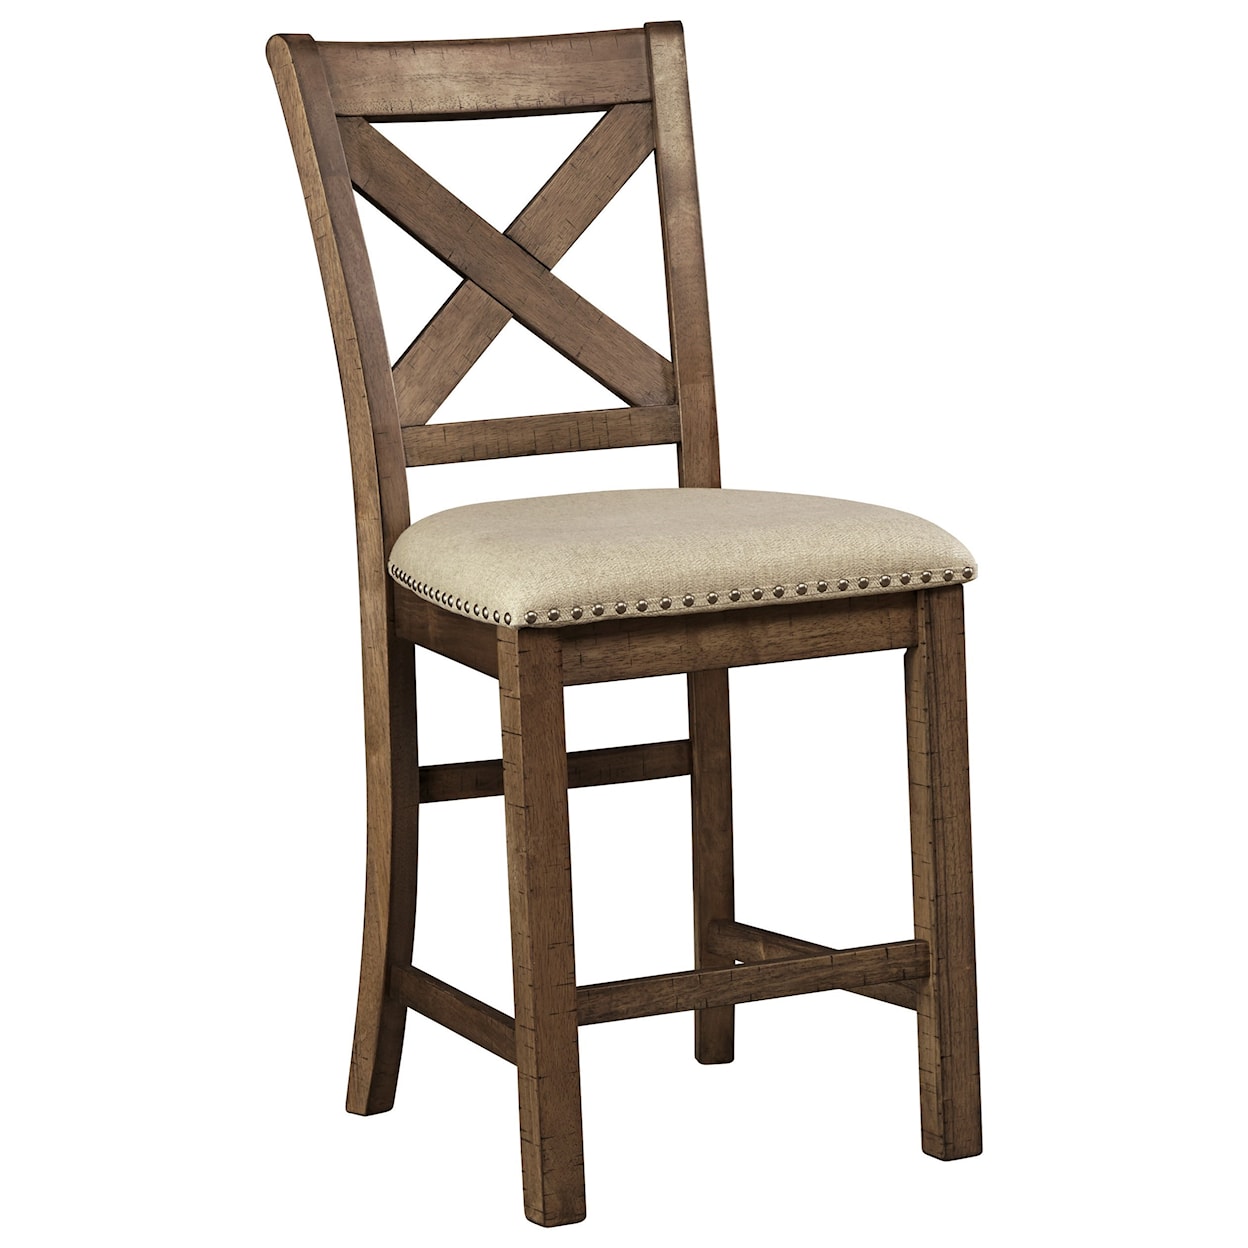 Signature Design by Ashley Moriville Upholstered Barstool With X-Back